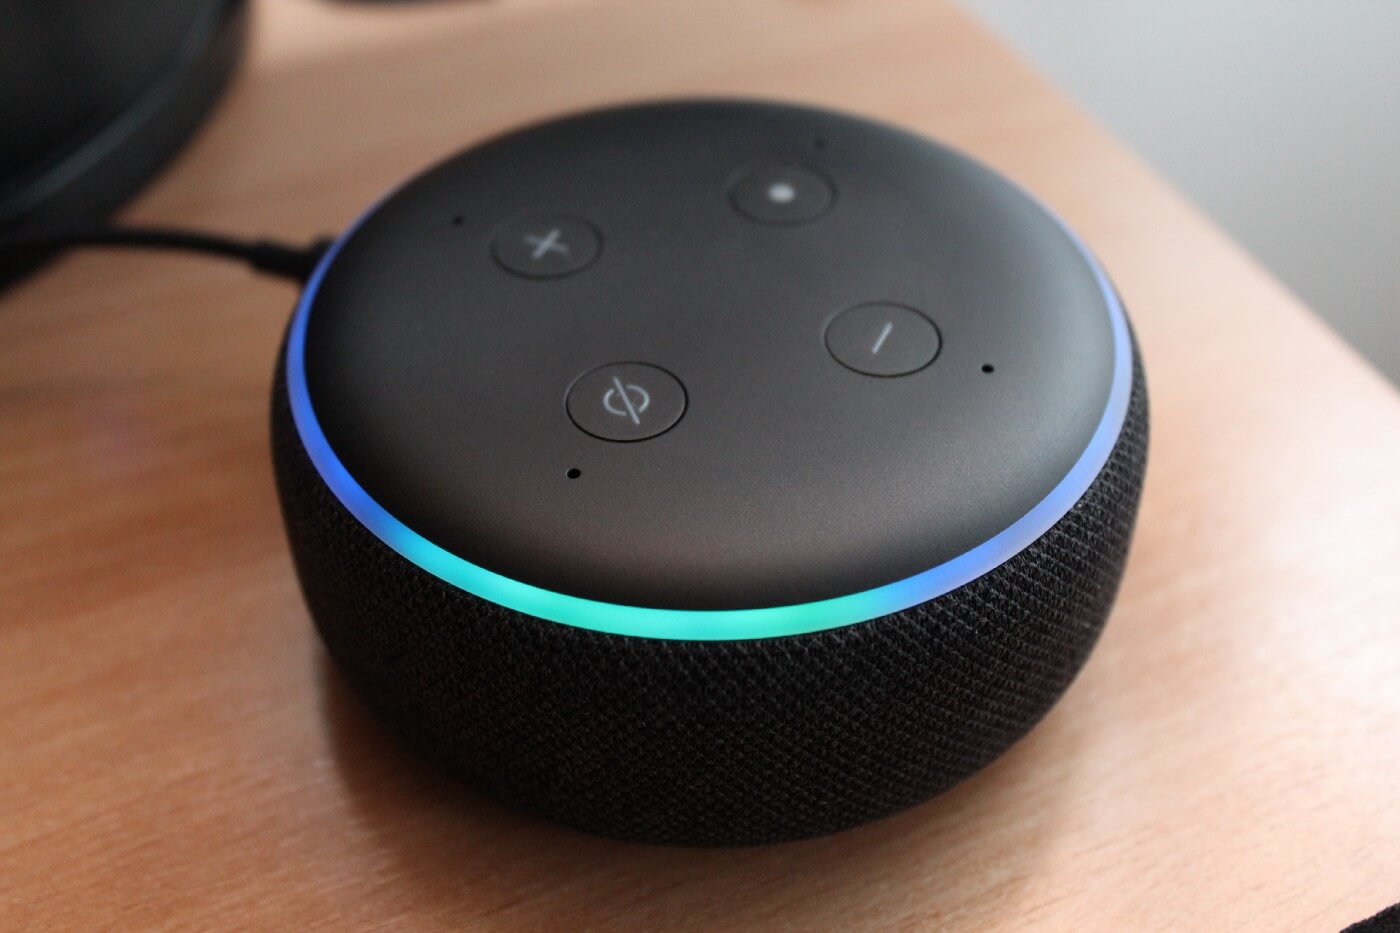 Spinning Blue and Cyan on Alexa